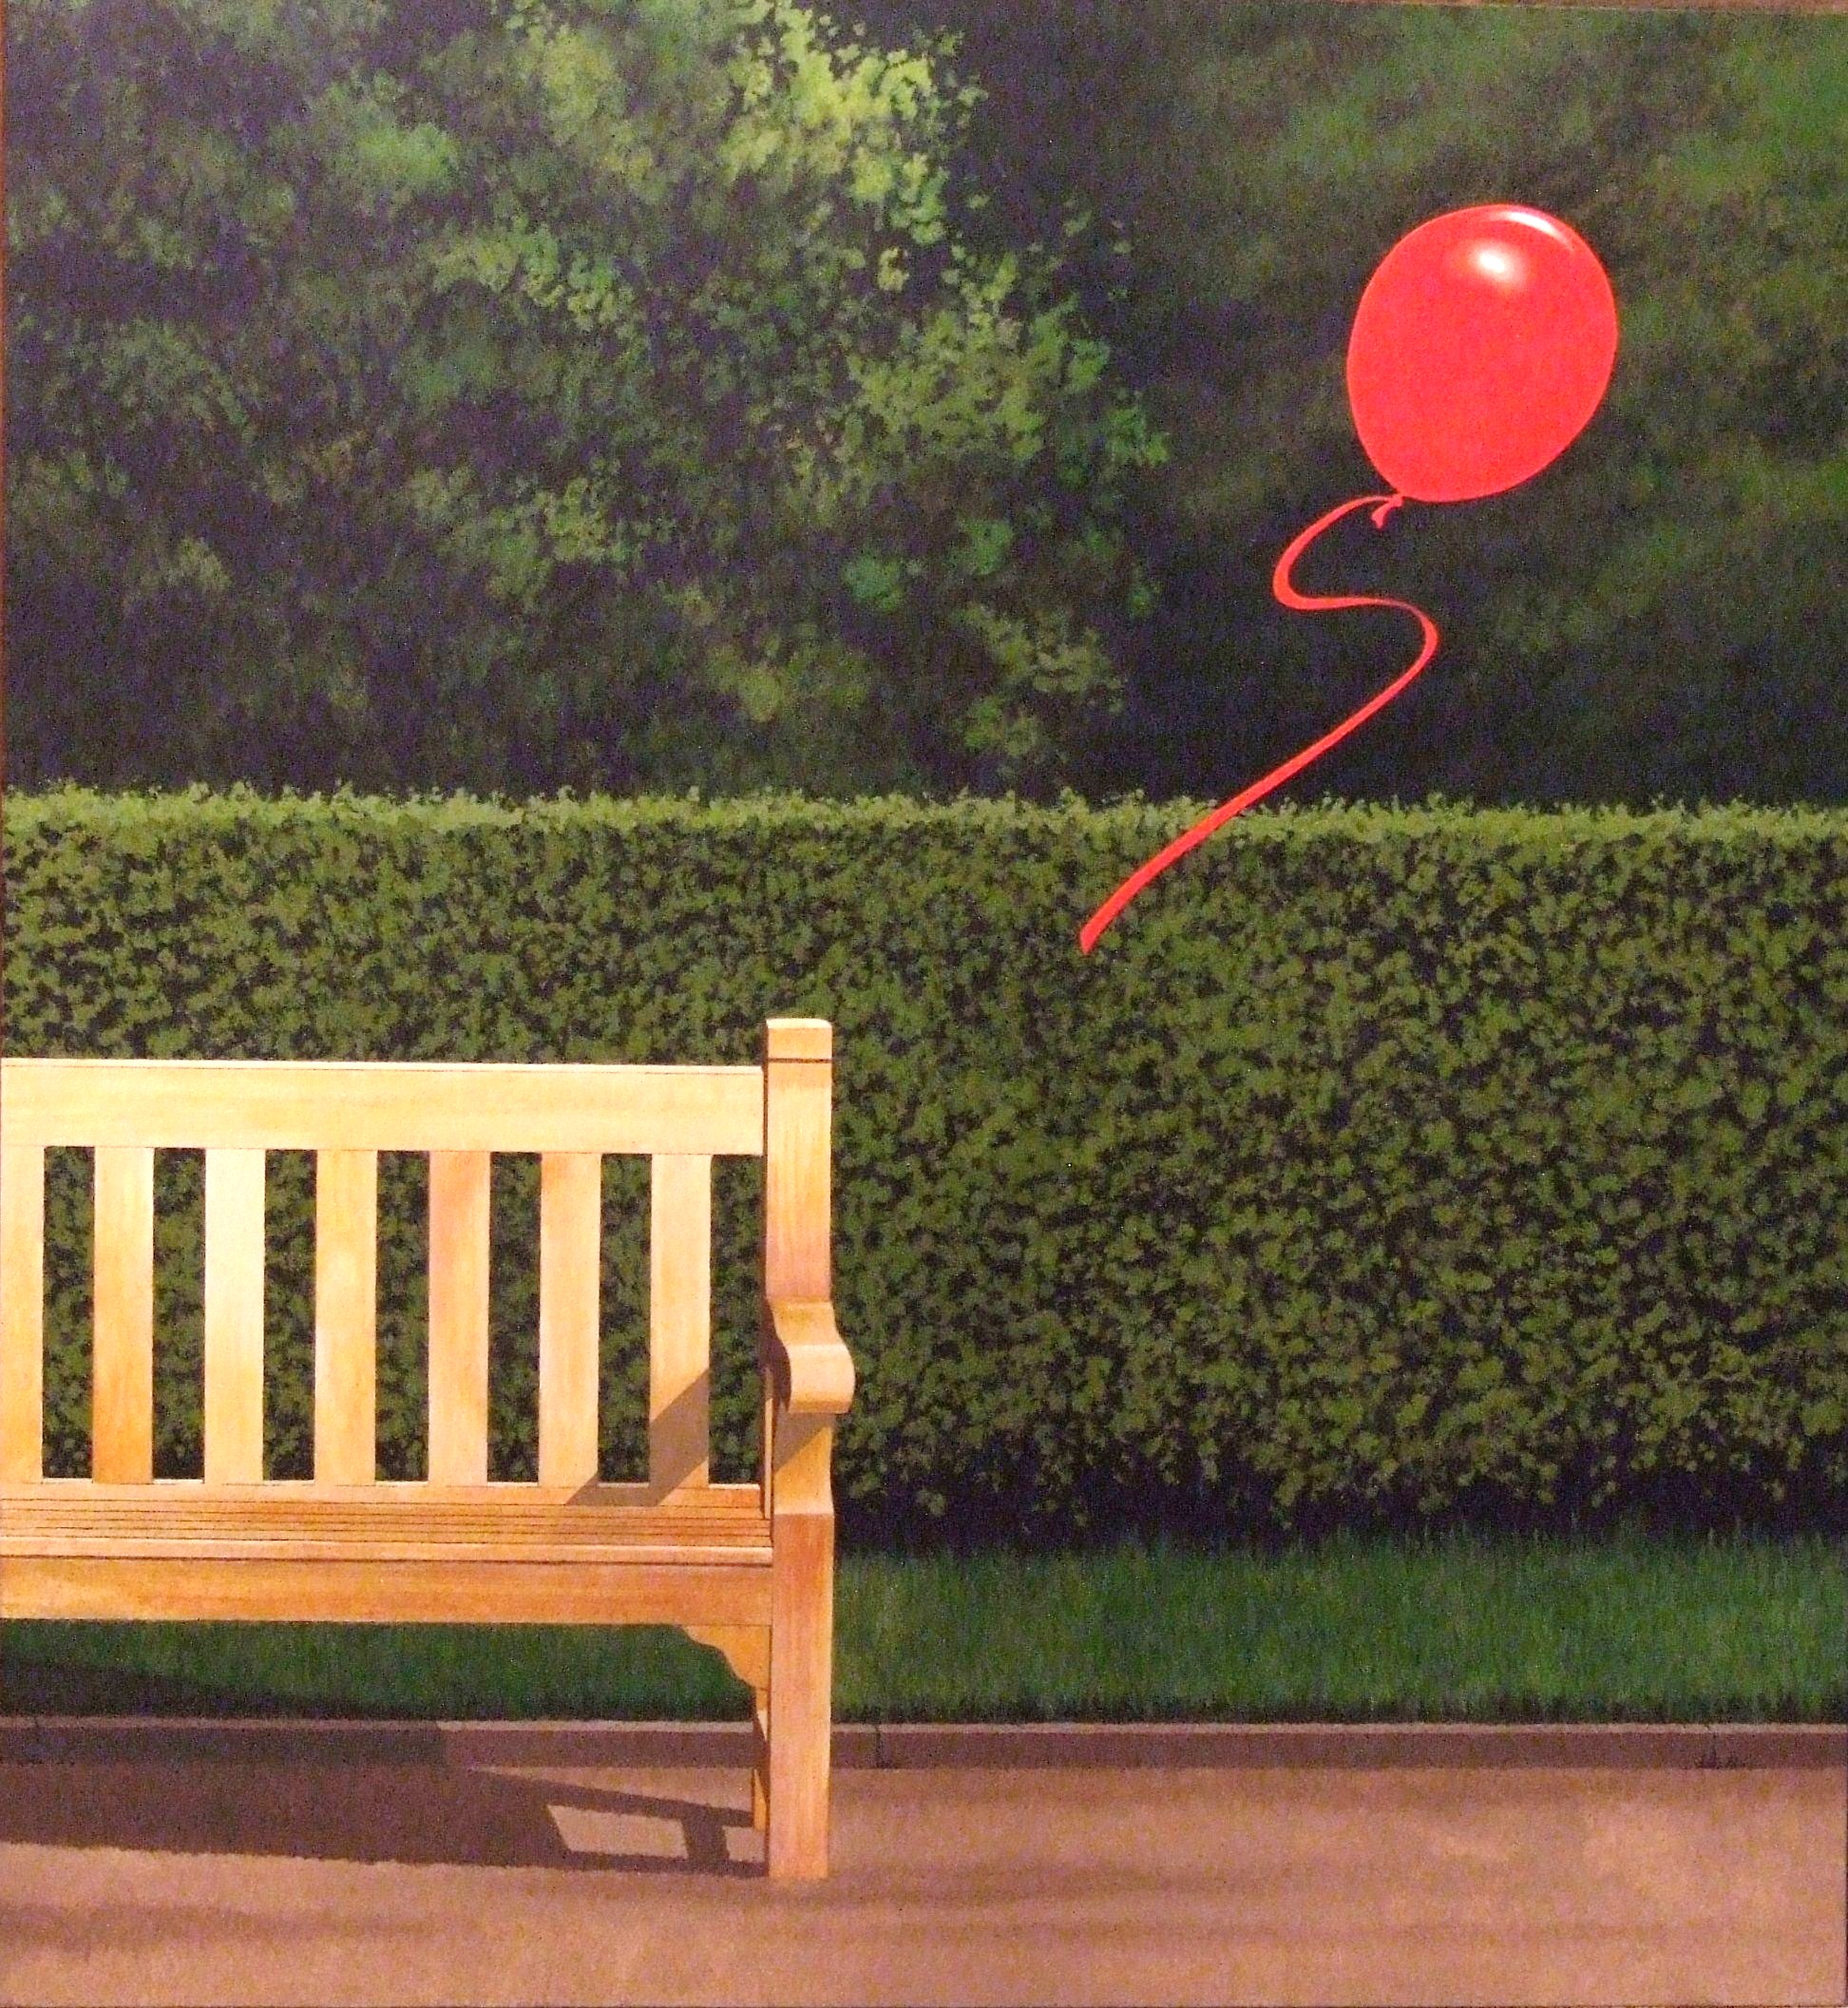 Painting of a red balloon floating past a park bench